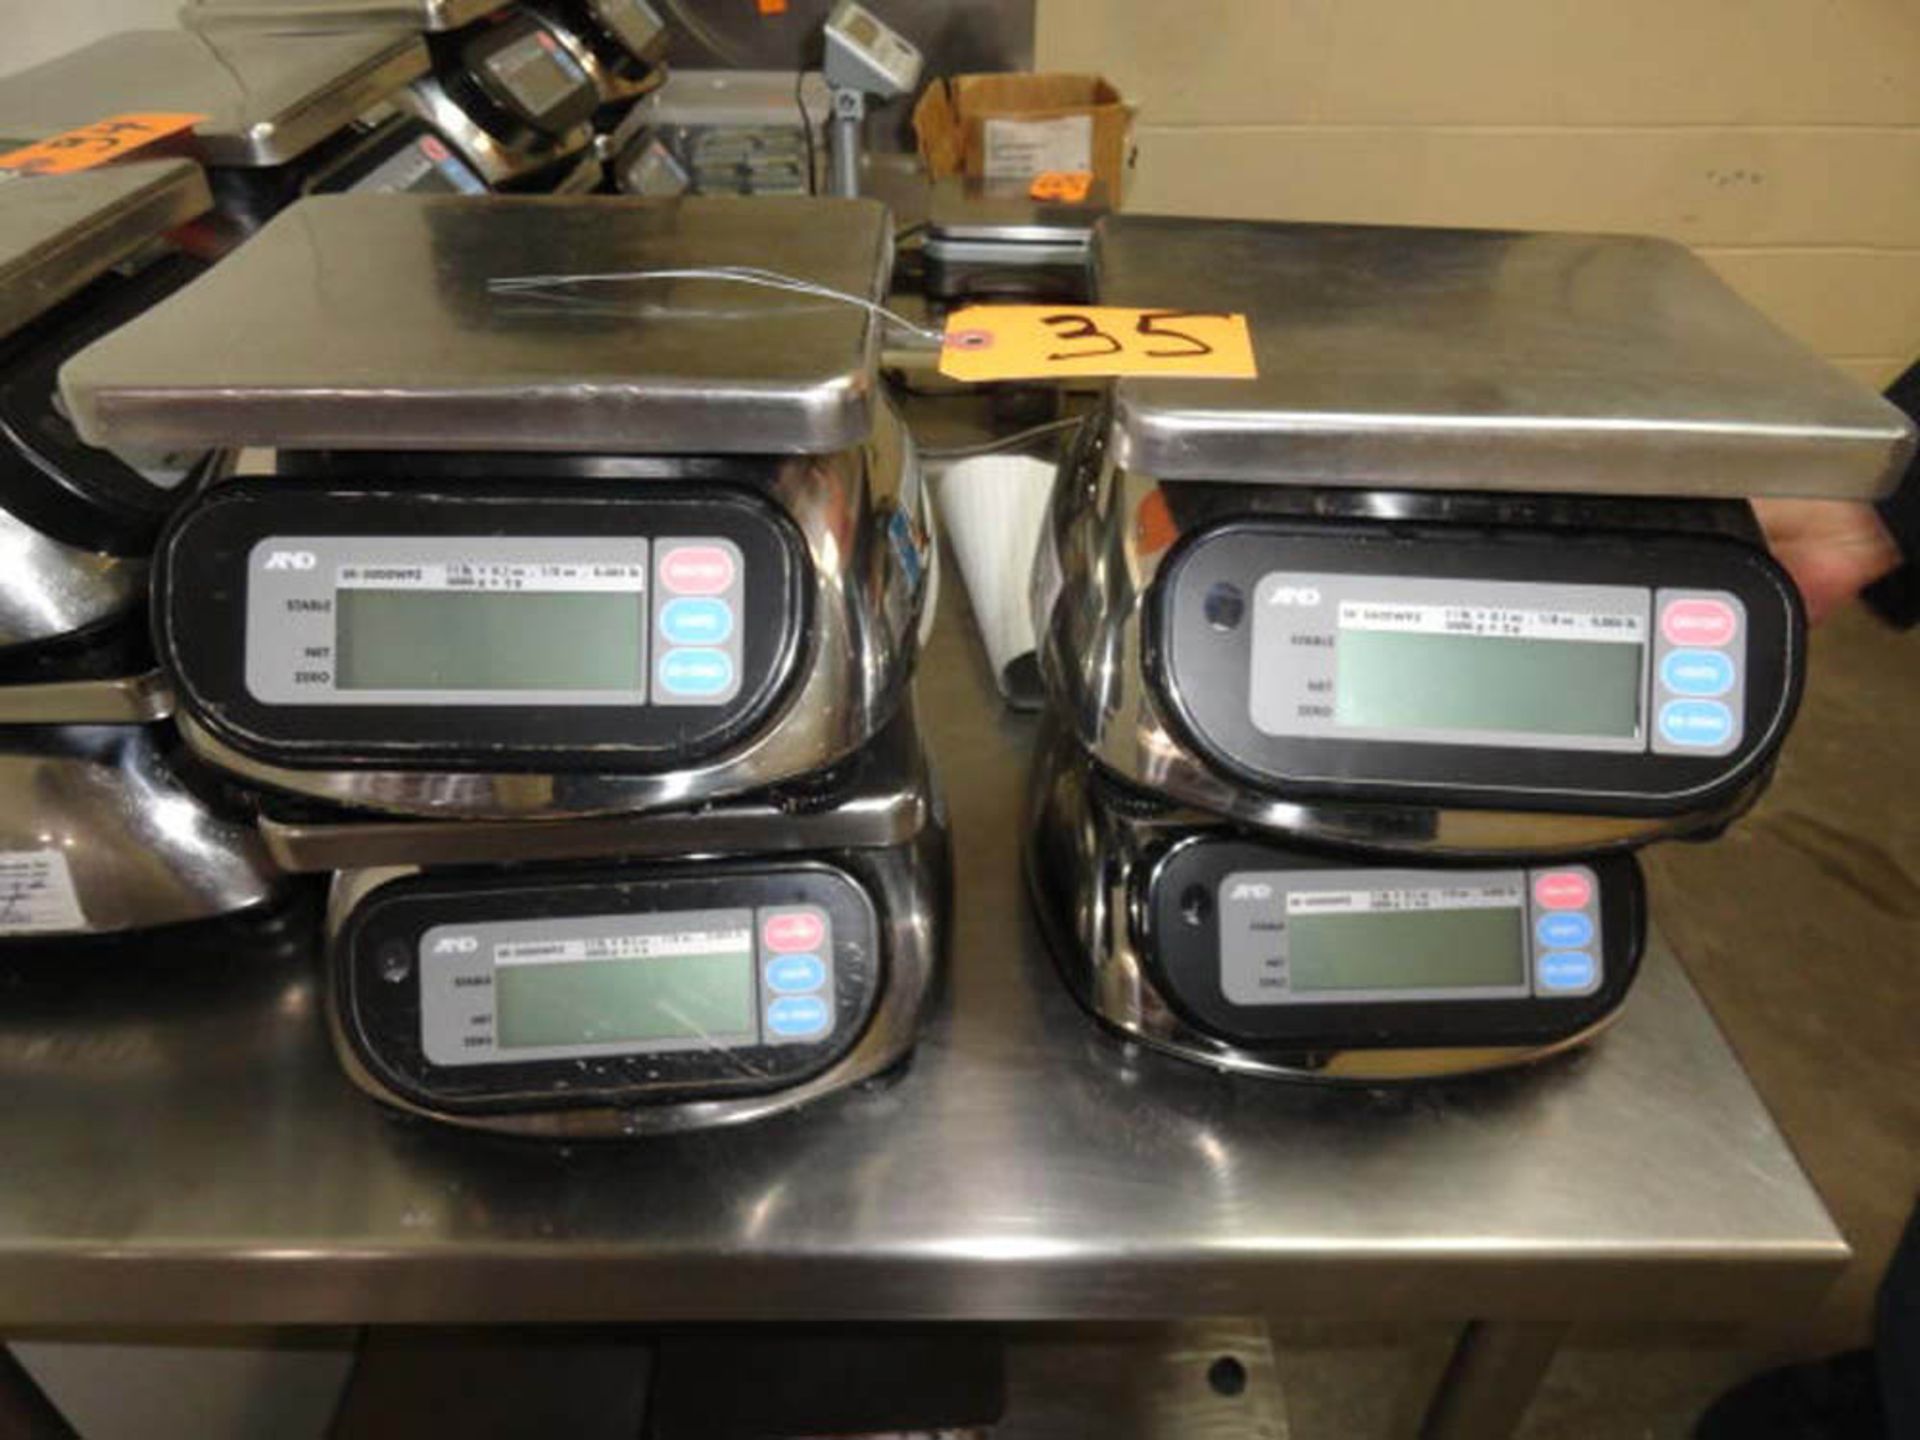 (4) AND DIGITAL SCALE, BATTERY OPERATED, 11# X 0.1, 5000 GRAM - Image 2 of 2